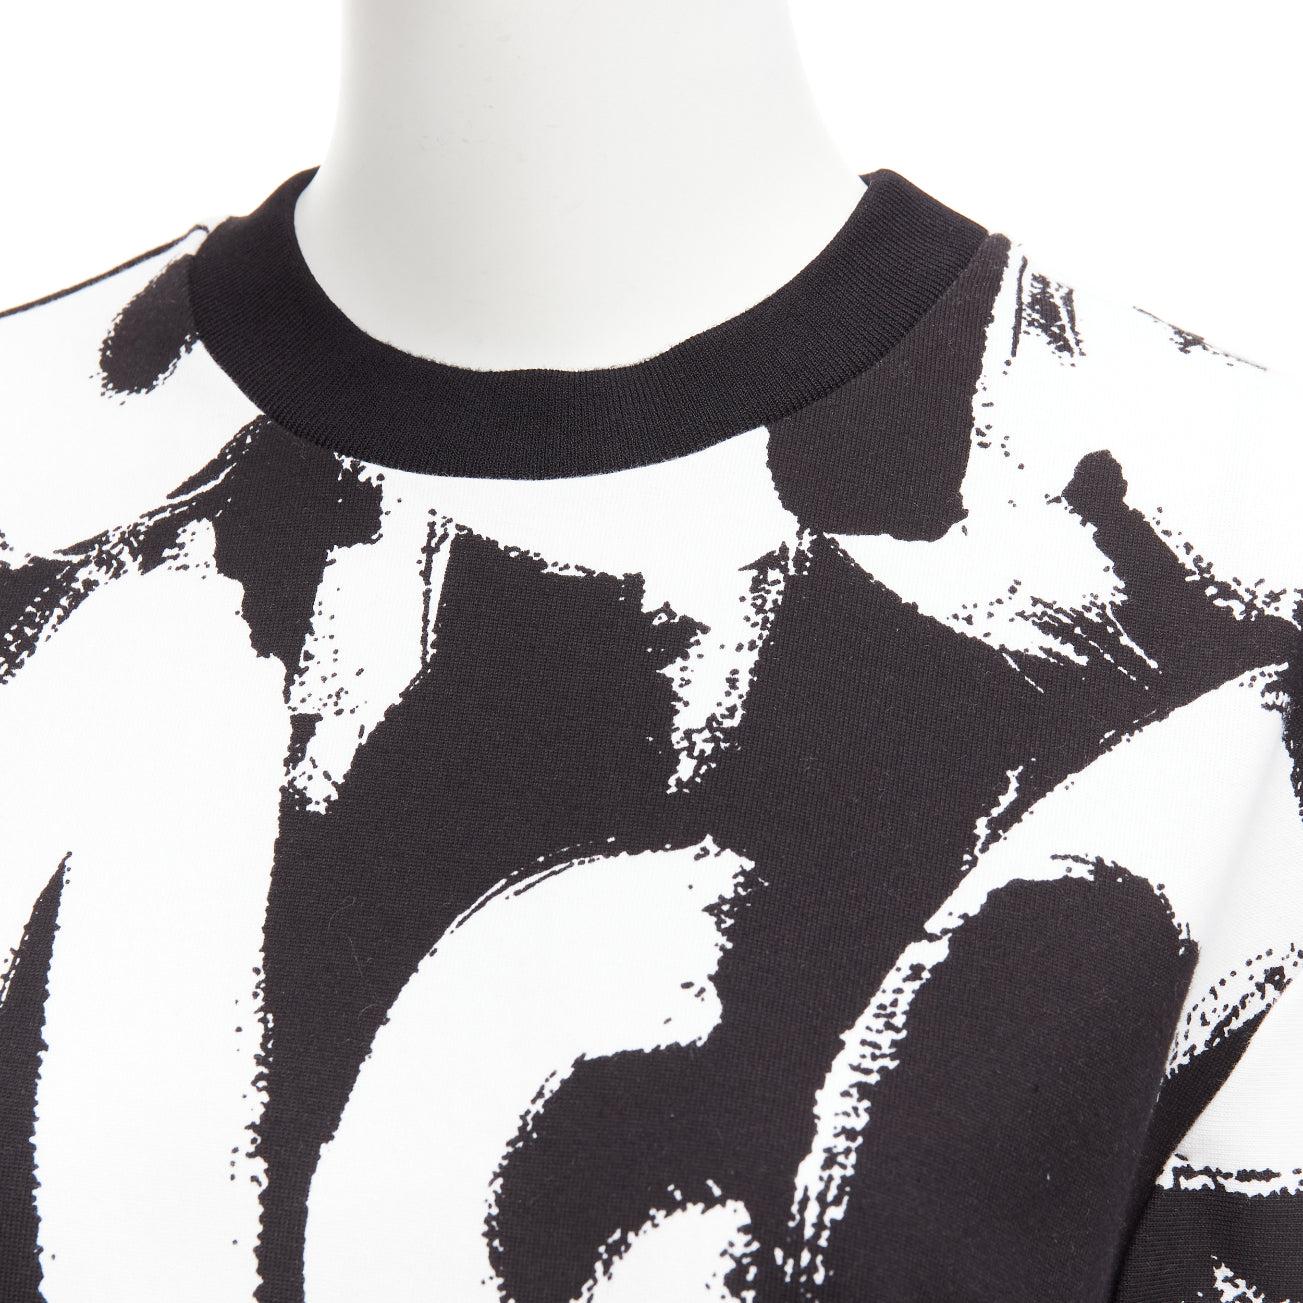 ALEXANDER MCQUEEN 2021 black white cotton graffiti brush boxy top IT36 XXS
Reference: AAWC/A00794
Brand: Alexander McQueen
Designer: Sarah Burton
Collection: 2021
Material: Cotton
Color: Black, White
Pattern: Abstract
Closure: Slip On
Made in: